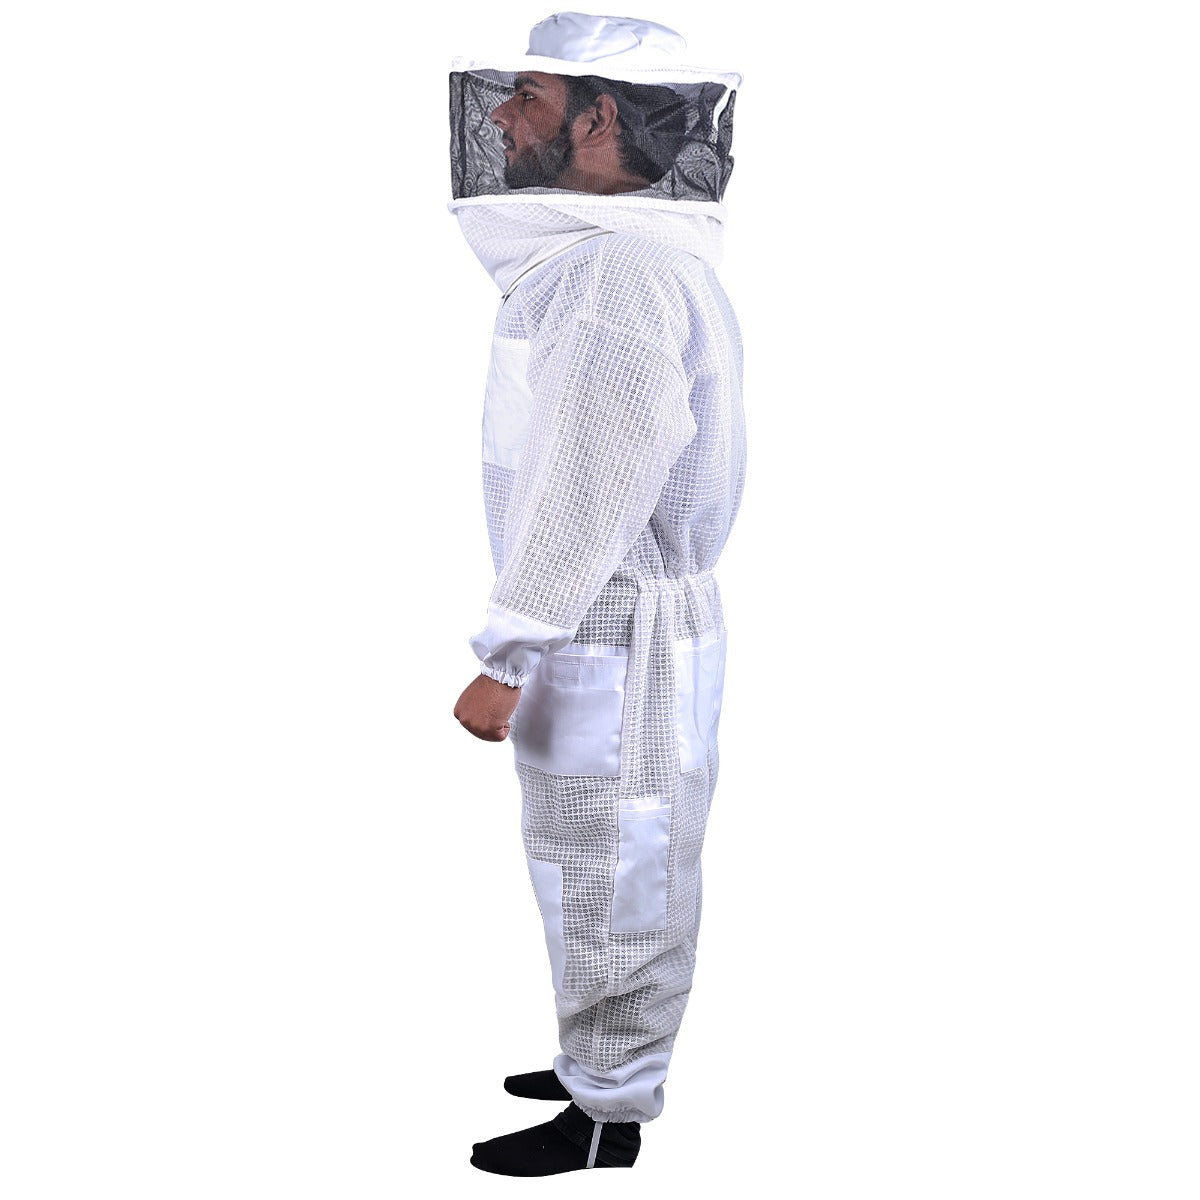 Full Suit 3 Layer Mesh Ultra Cool Ventilated Round Head Beekeeping Protective Gear SIZE M - image2